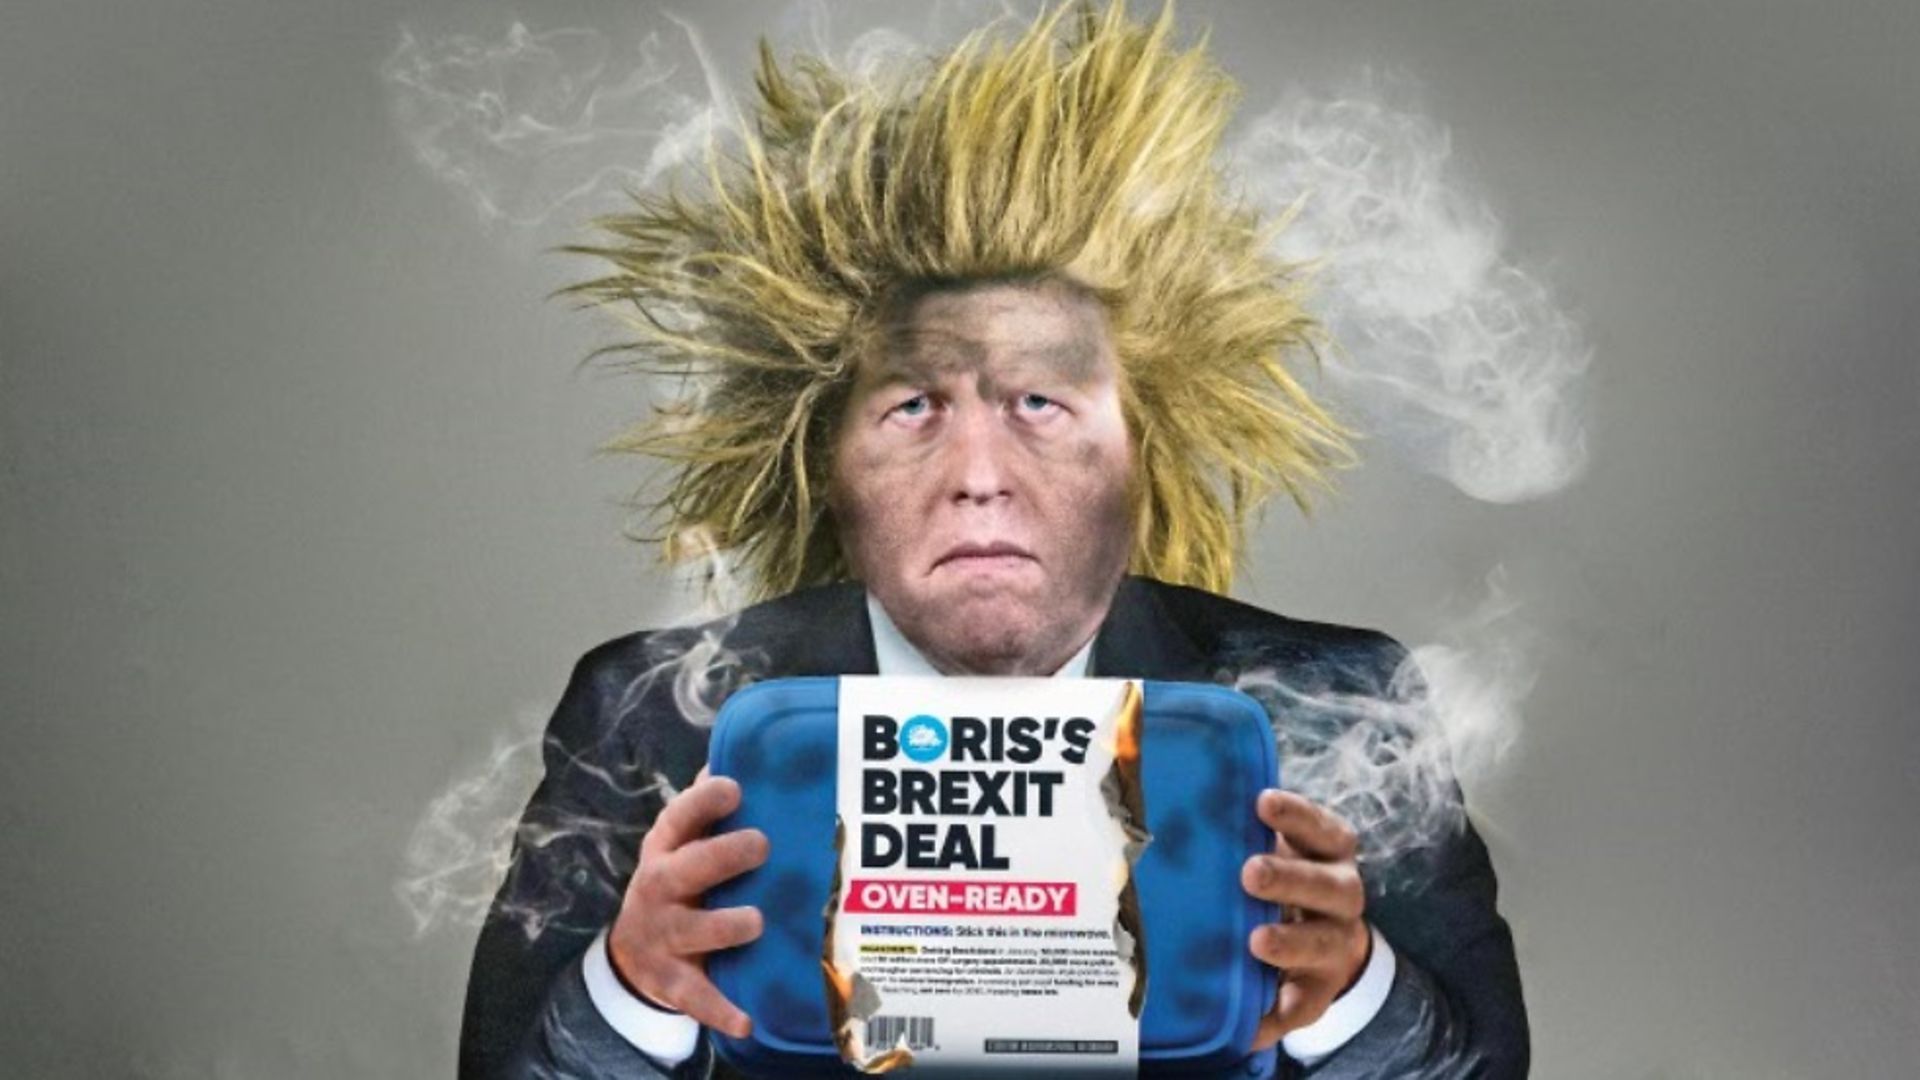 Boris Johnson with his oven-ready Brexit deal as illustrated by The New European - Credit: Archant